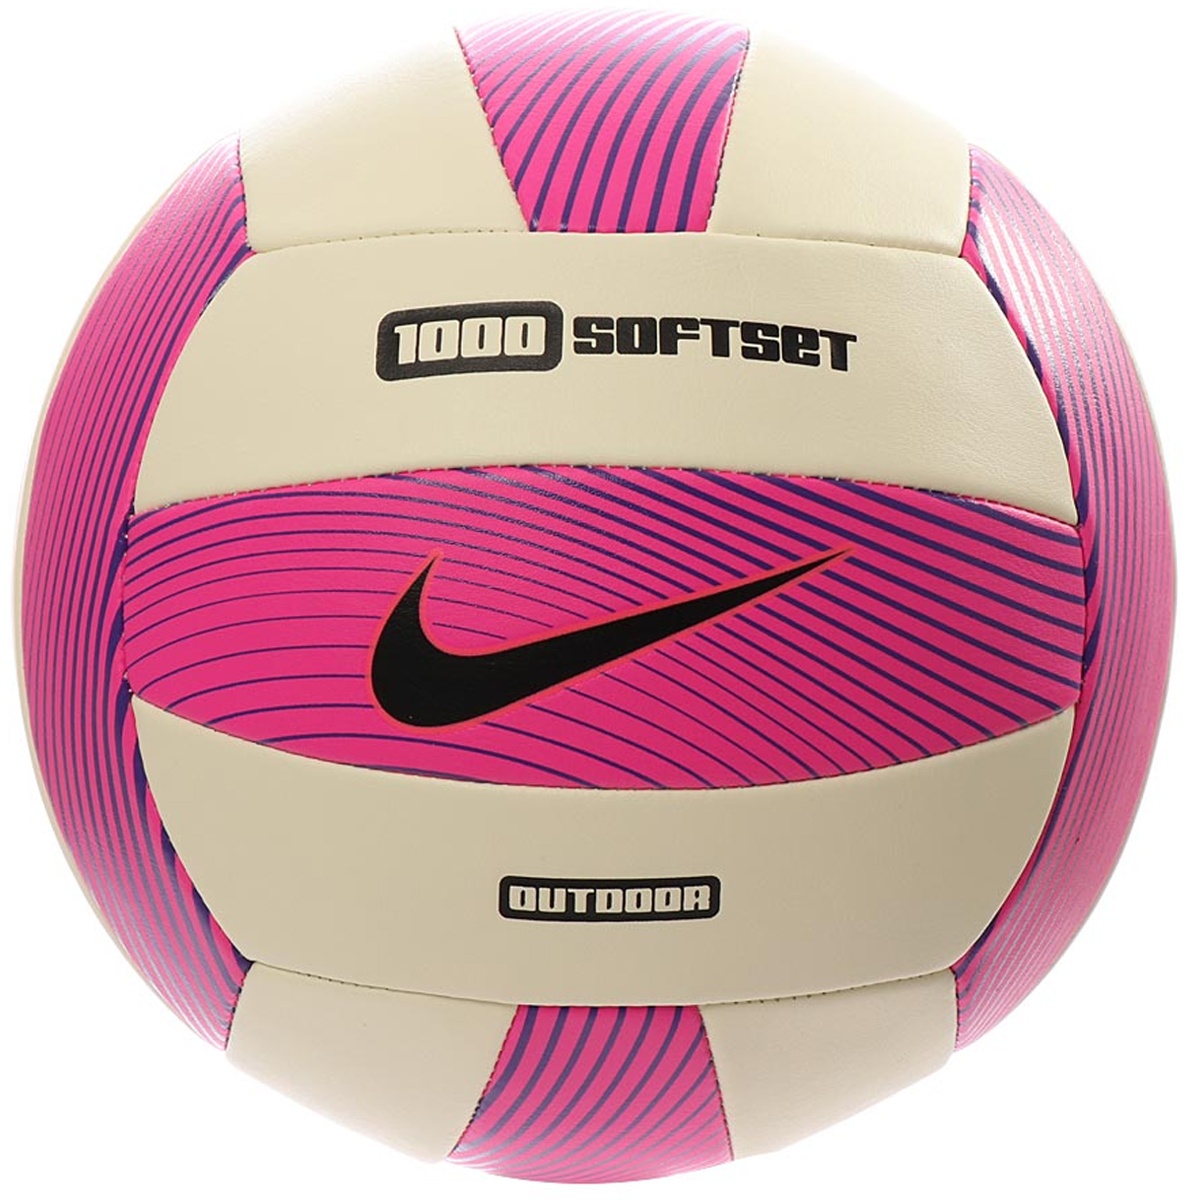 NIKE 1000 SOFTSET OUTDOOR VOLLEYBALL INF 1000